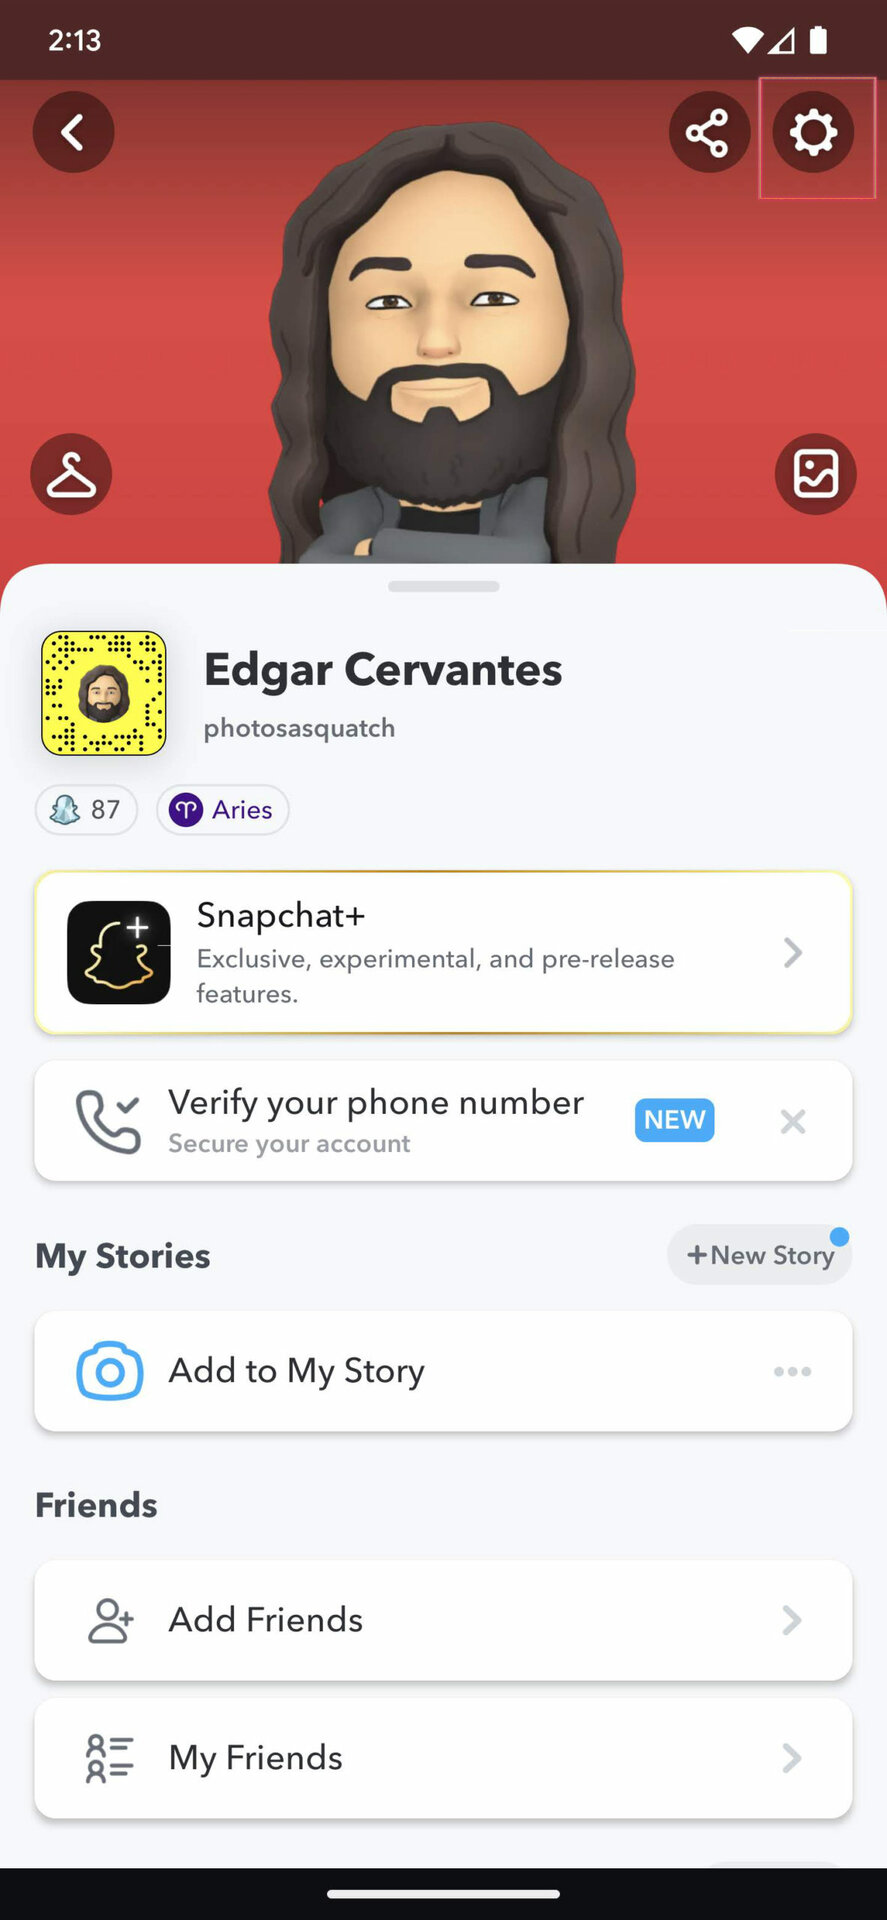 How to edit permissions in Snapchat 1